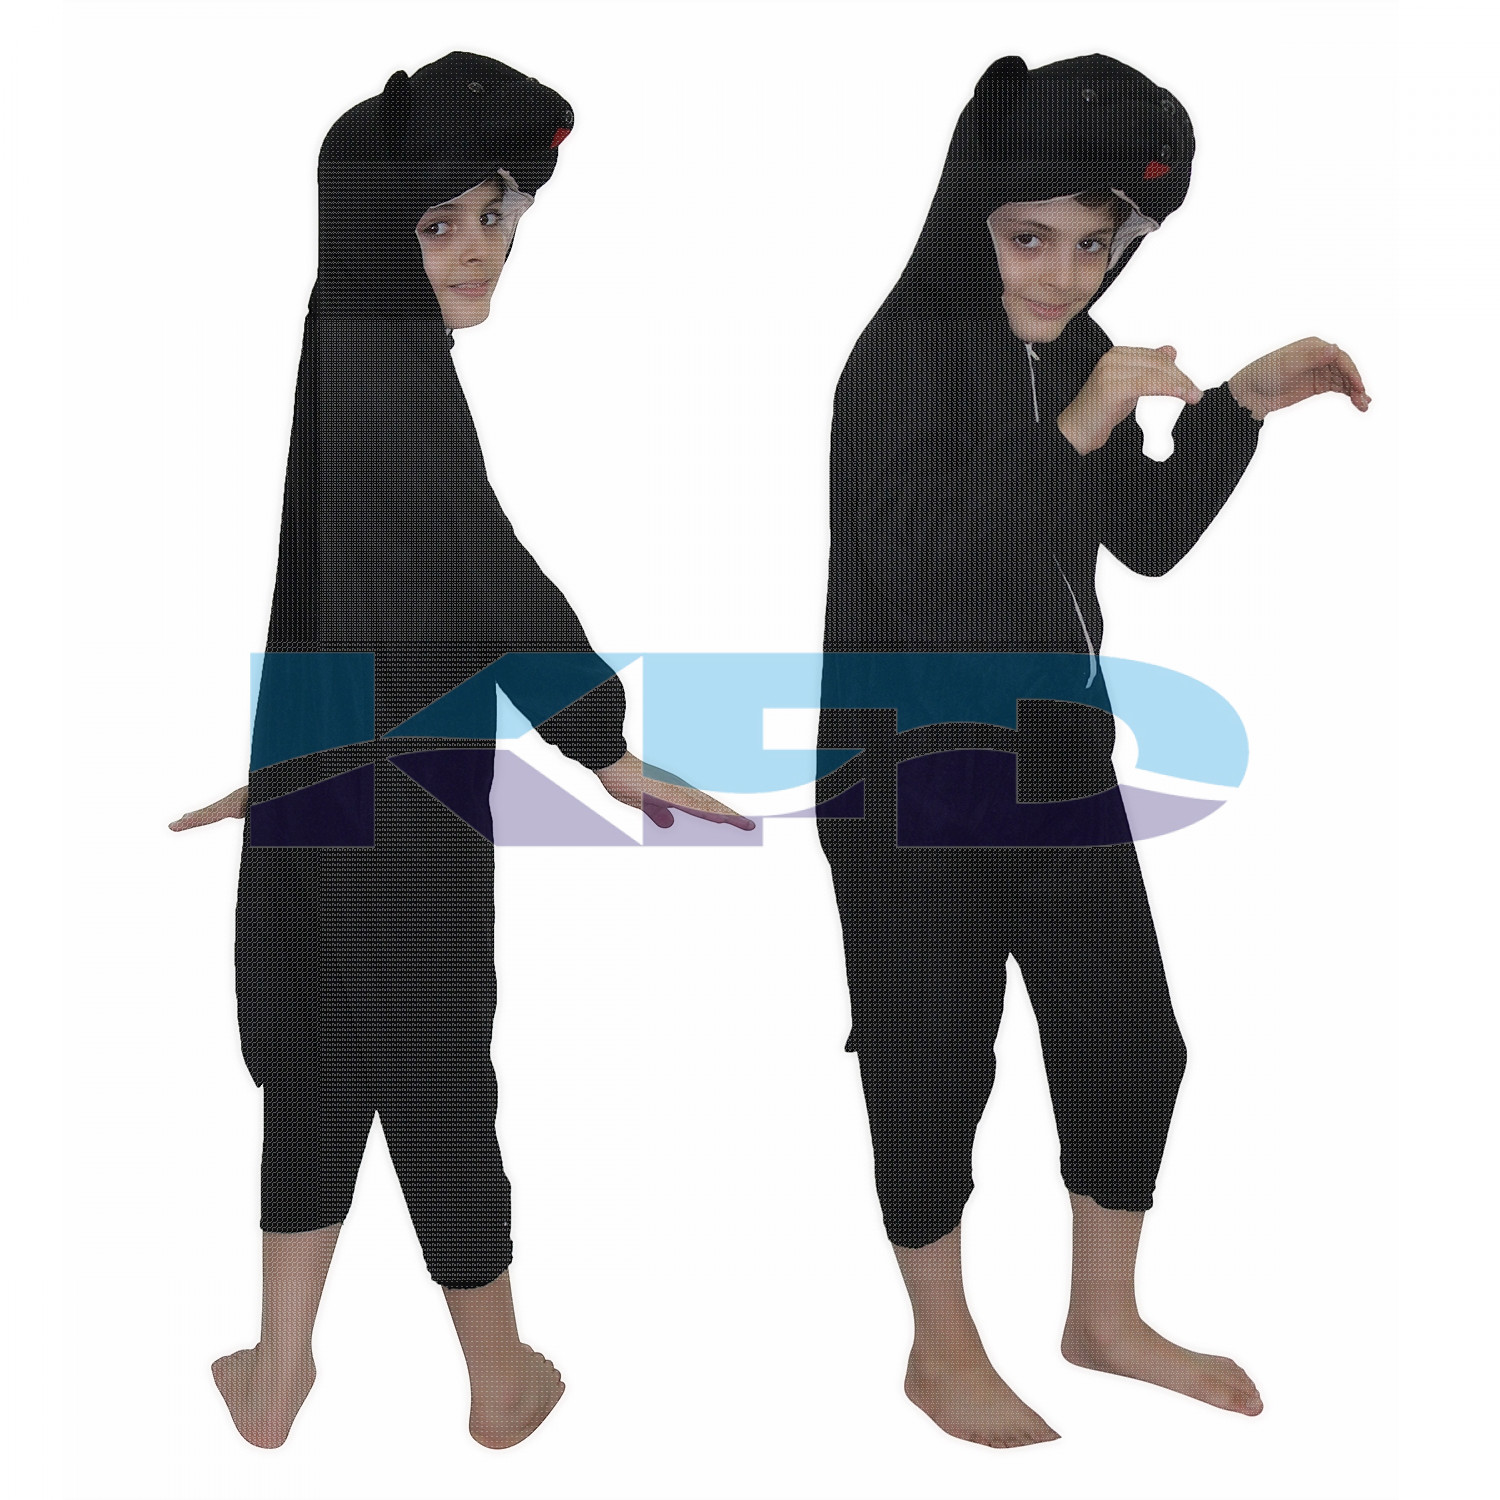 Bear fancy dress for kids,Wild Animal Costume for School Annual function/Theme Party/Competition/Stage Shows Dress